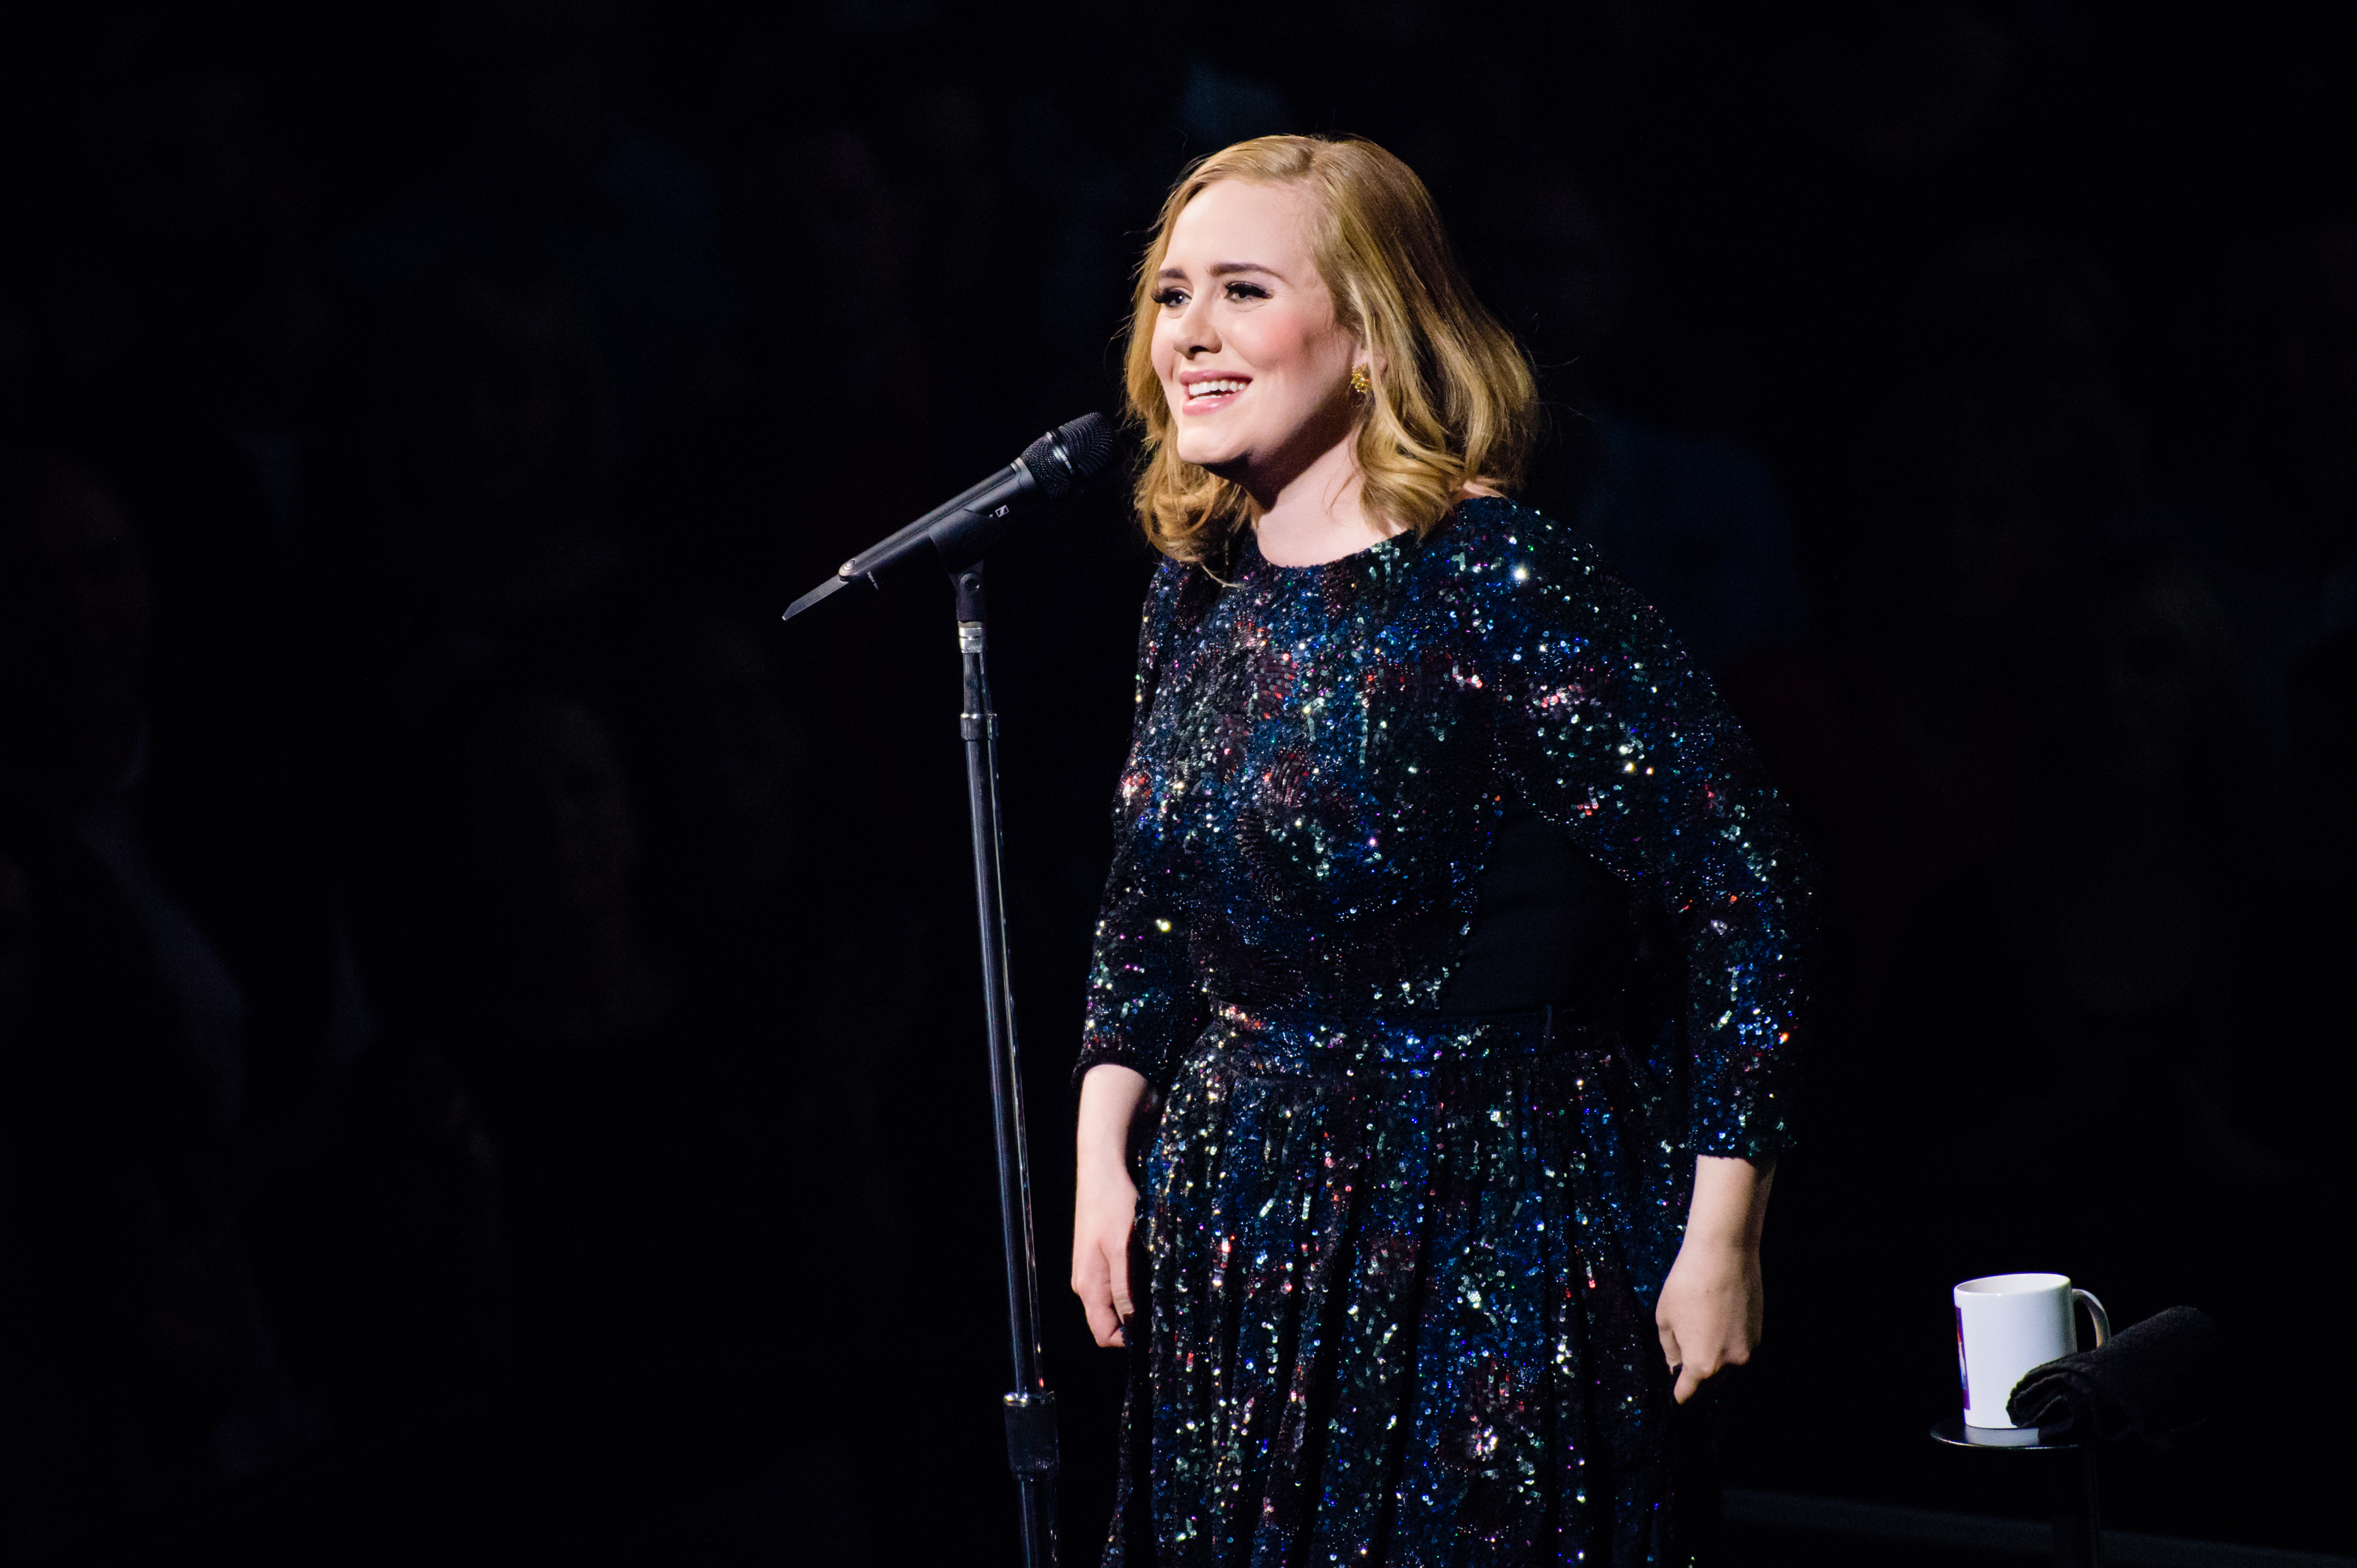 Singer Adele performs live on stage during a concert at Mercedes-Benz Arena on May 07, 2016 in Berlin, Germany. (Stefan Hoederath—September Manag/Getty Images)